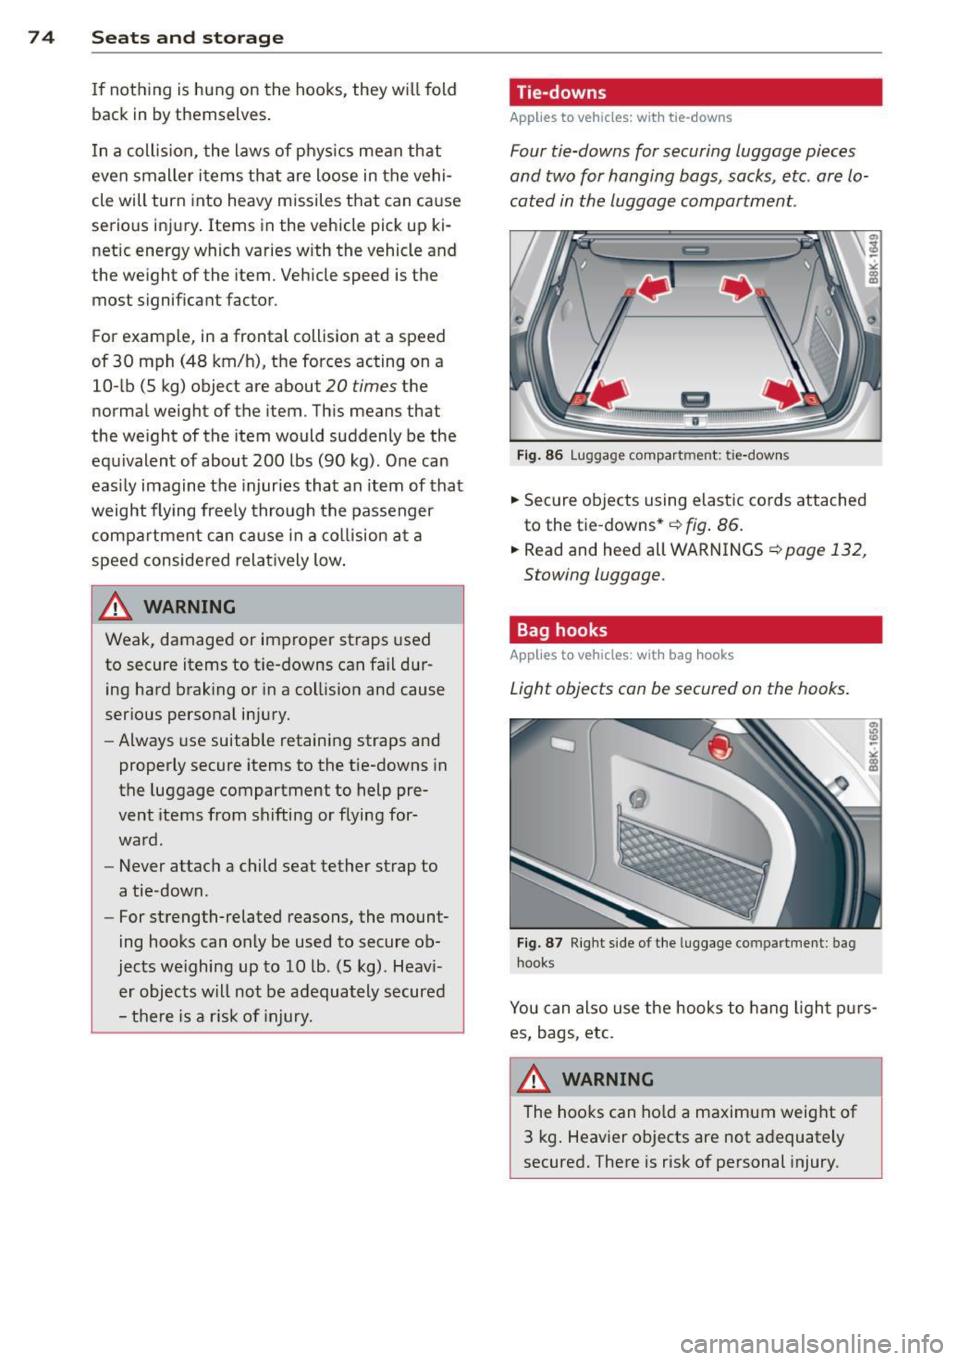 AUDI A4 2015  Owners Manual 7 4  Seats  and storage 
If nothing  is hung  on  the  hooks,  they  will fold 
back  in  by themselves. 
In  a collision,  the  laws  of  physics  mean  that 
even  smaller  items  that  are  loose  